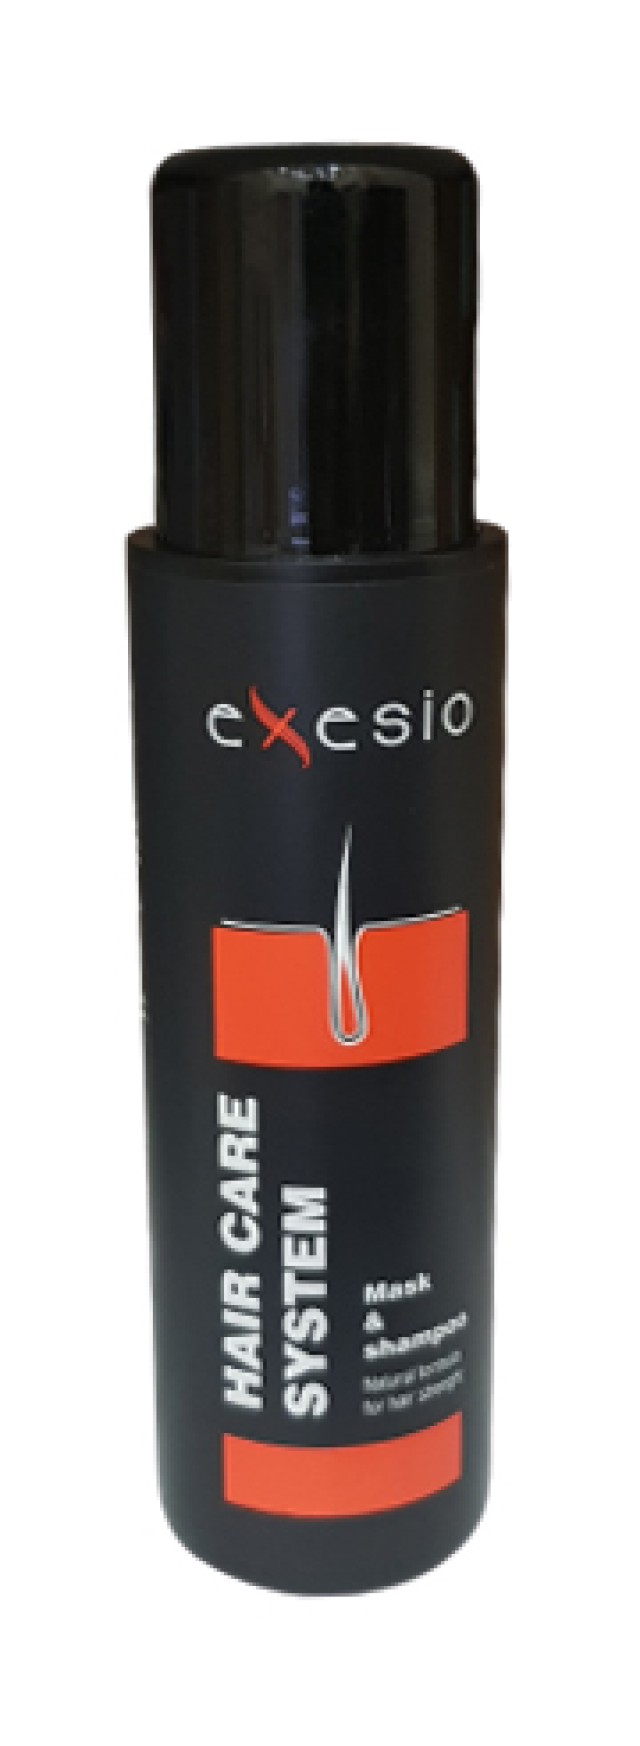 EXESIO HAIR CARE SYSTEM ΜΑΣΚΑ ΣΑΜΠΟΥΑΝ 500ml